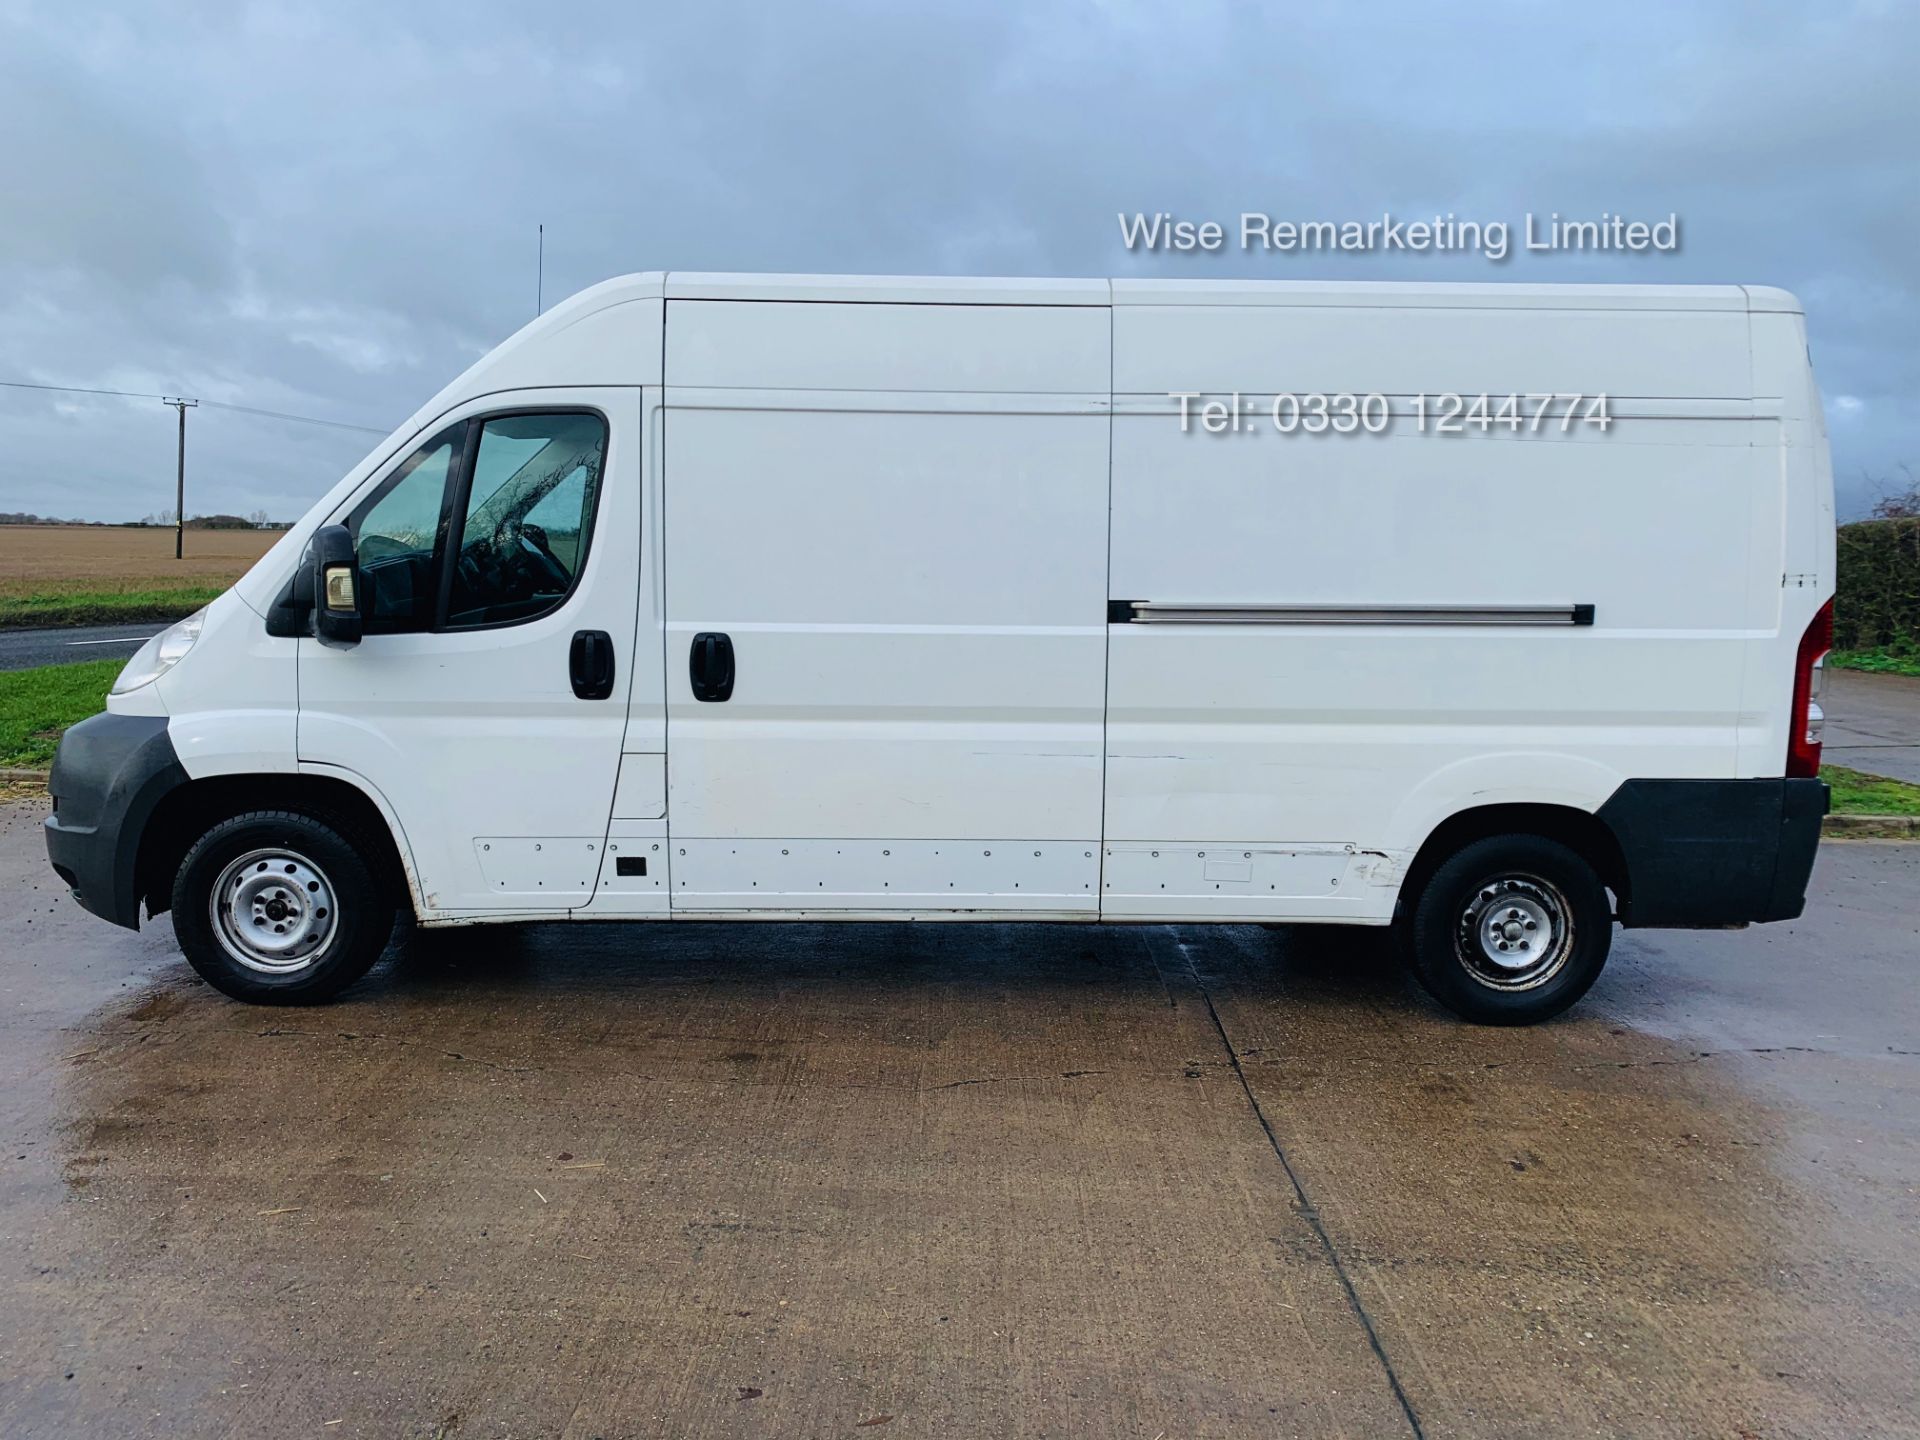 Peugeot Boxer 335 2.2 HDi (L3H2) 2014 Model - 1 Keeper From New - Long Wheel Base - Image 2 of 17